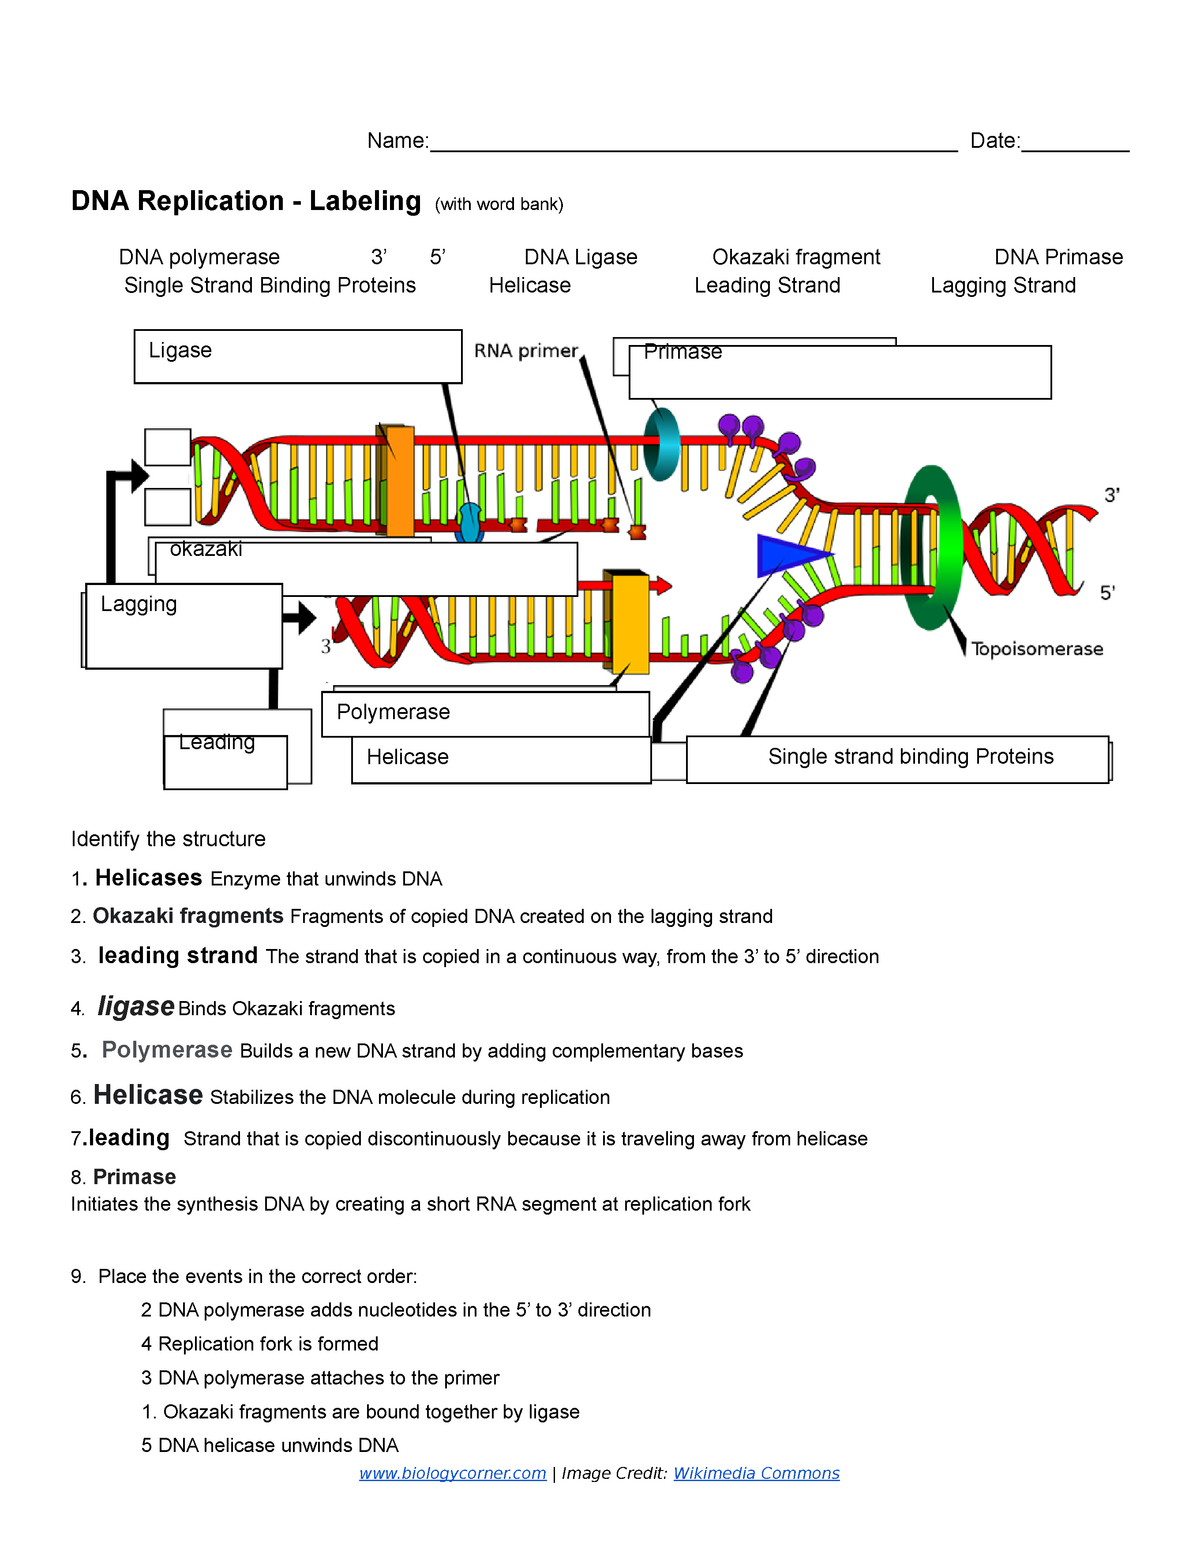 Copy of DNA Replication - Labeling 25 - Name: - StuDocu Throughout Dna Replication Worksheet Answer Key